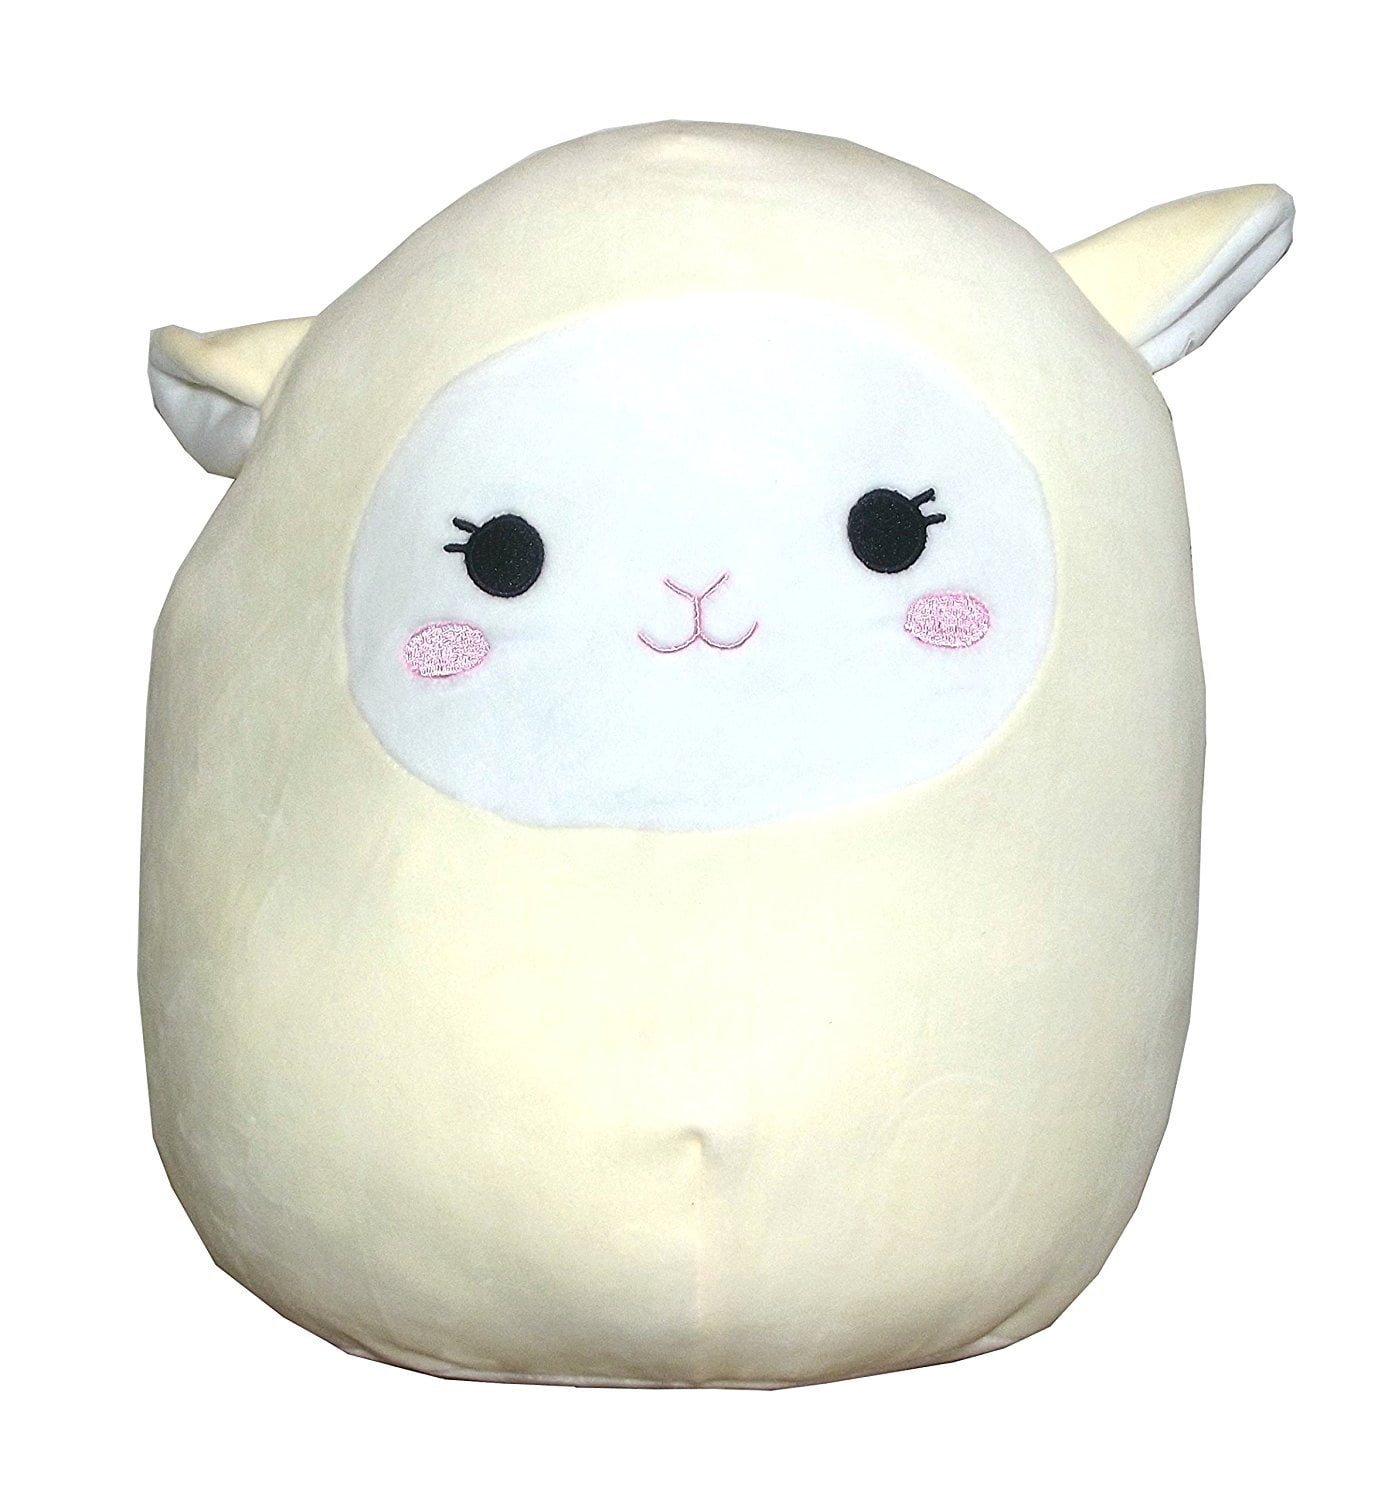 Squishmallow Lily Lamb 5" Target Easter 2021 With Glasses for sale online